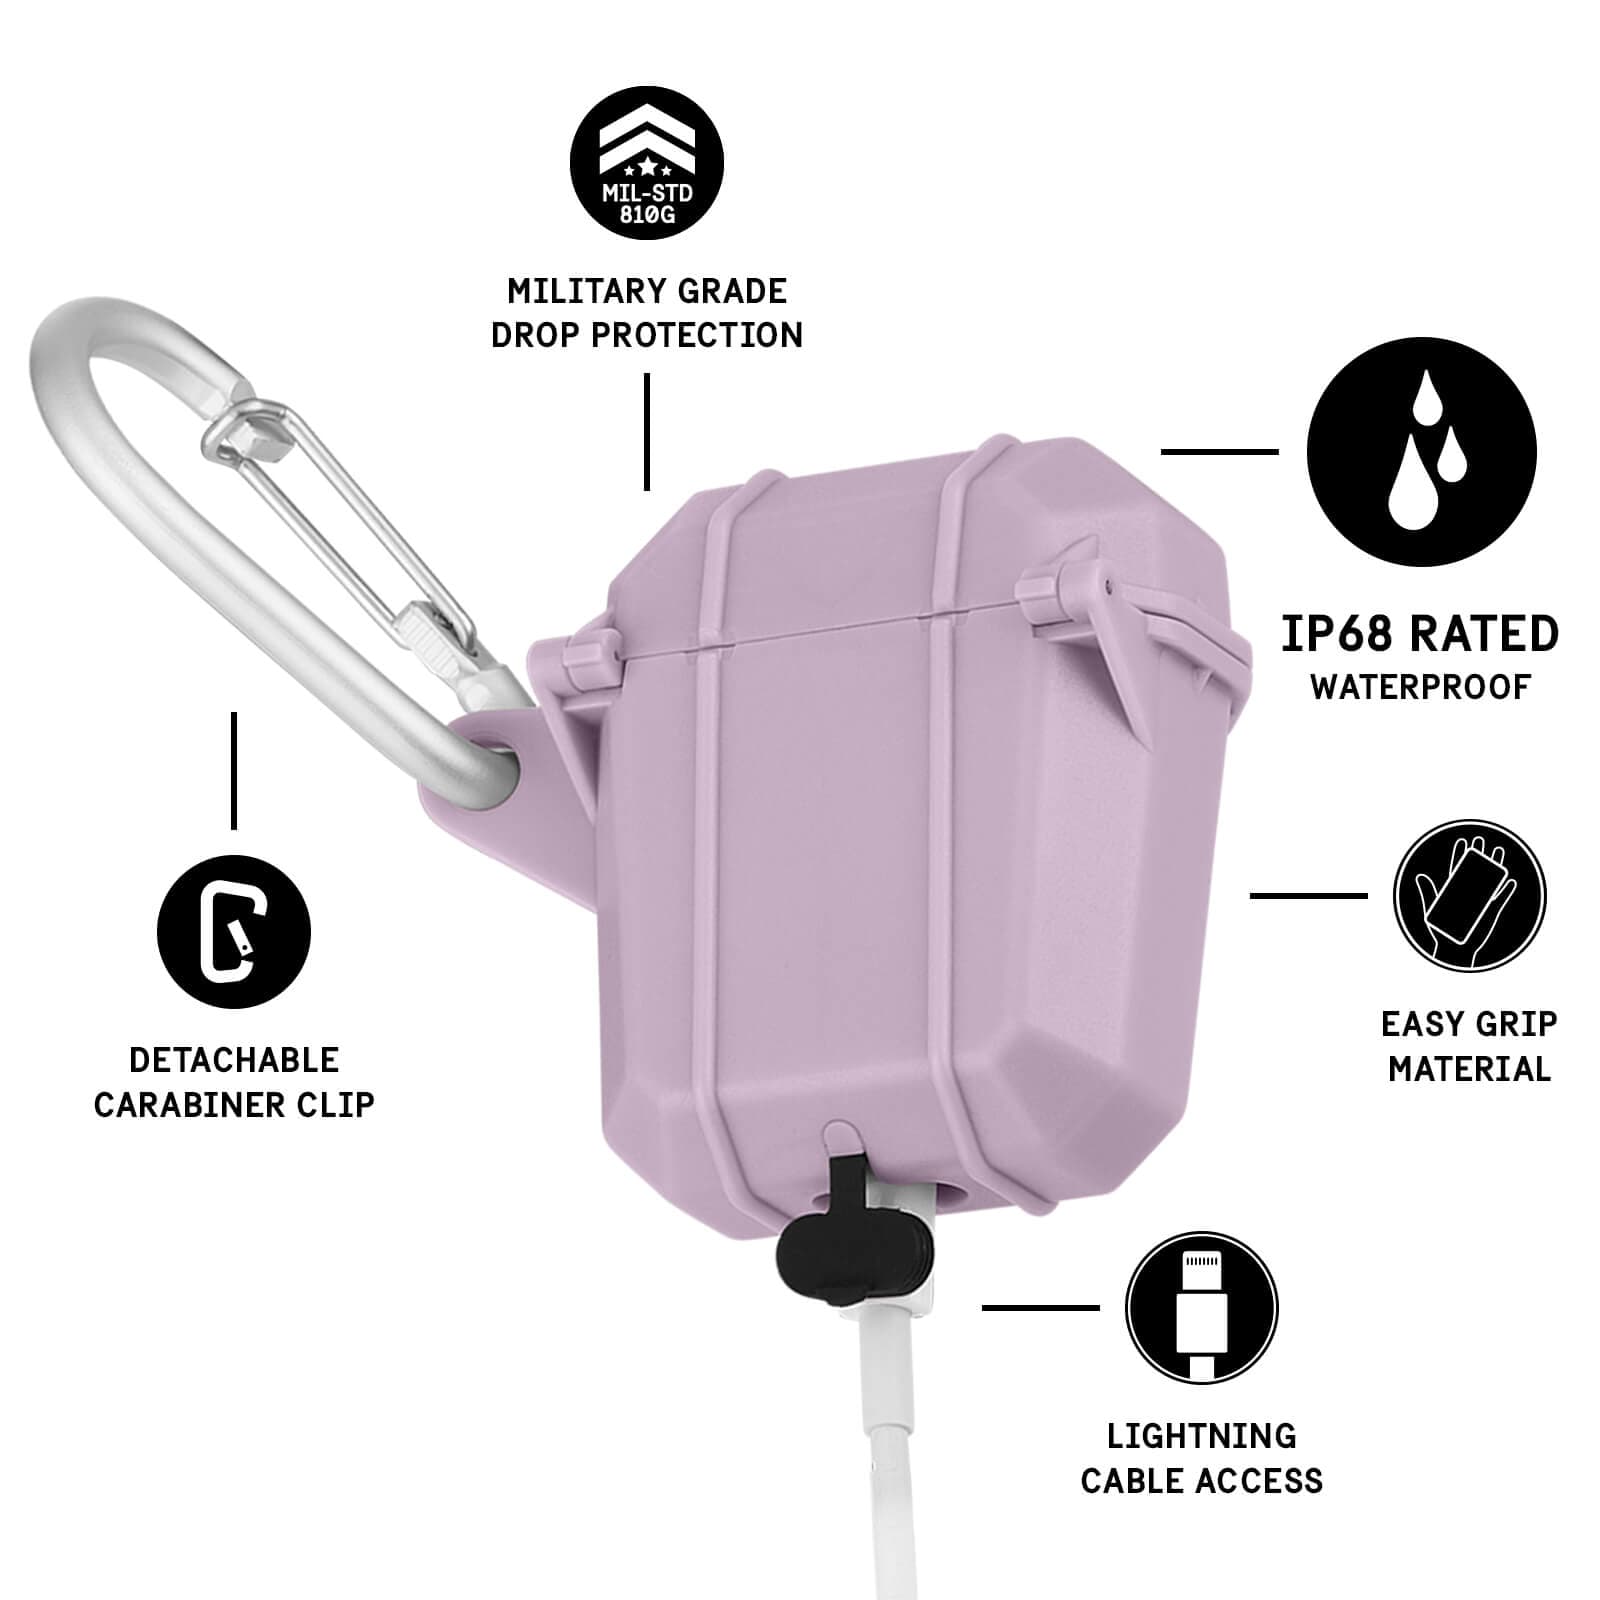 Features military grade drop protection, detachable carabiner clip, lightning cable access, easy grip material, IP68 rated waterproof. color::Mauve